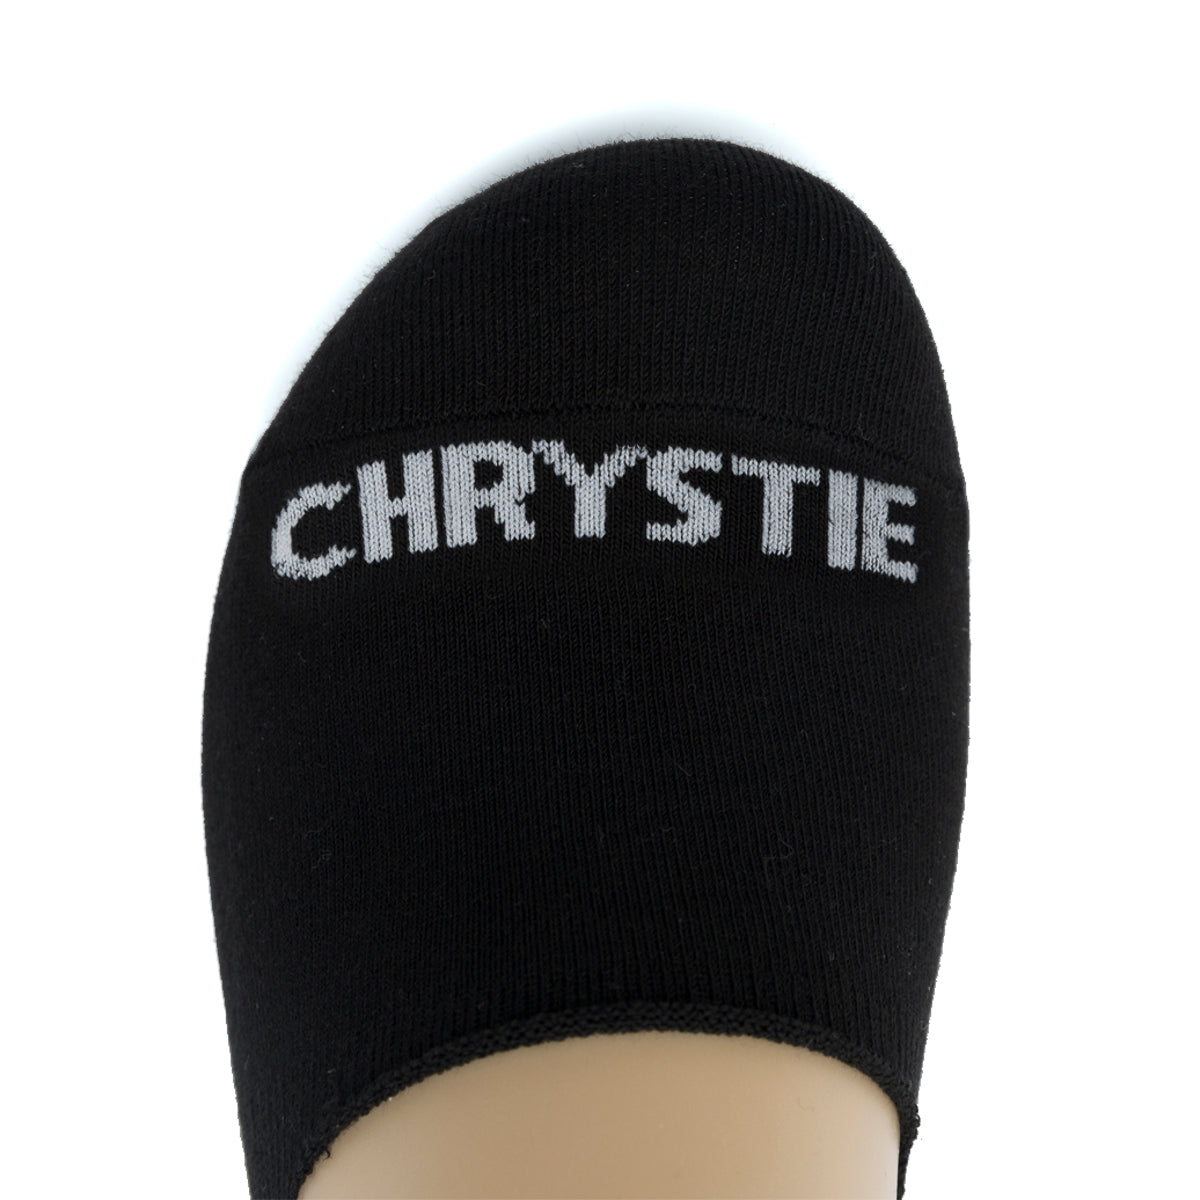 Load image into Gallery viewer, Chrystie No Show Socks 2 Pack